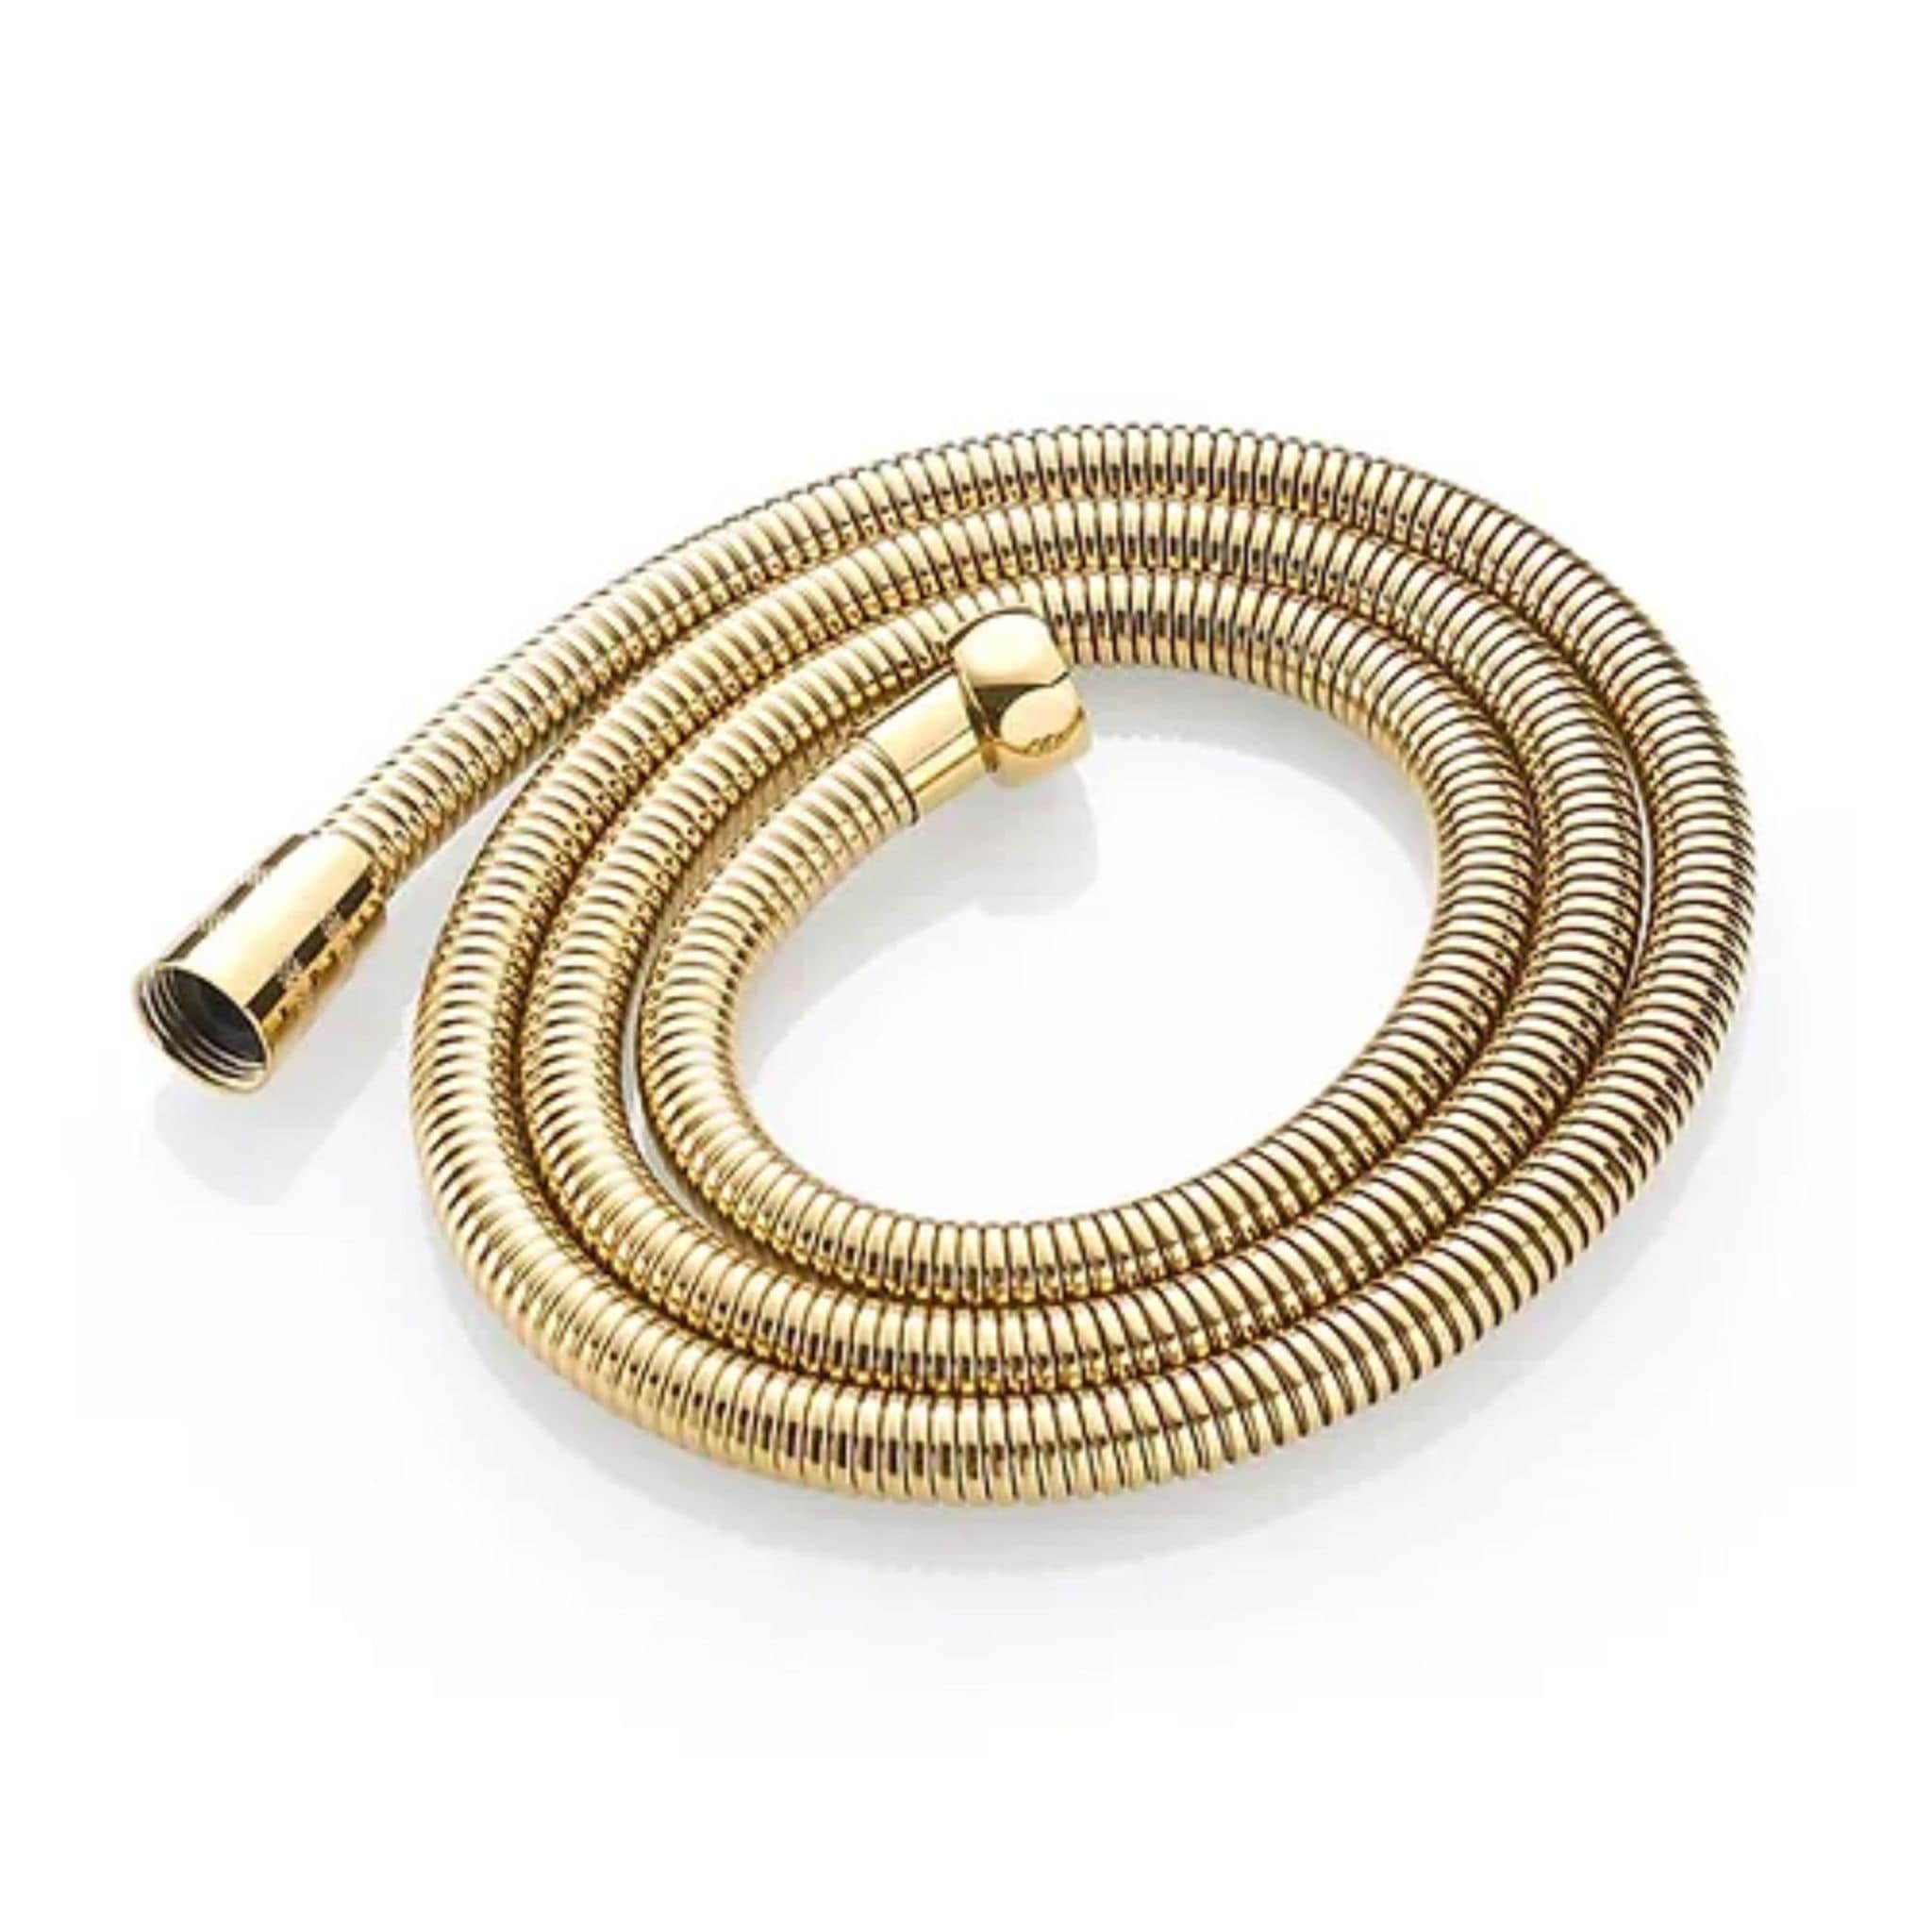 OE SmoothPour 1.5M Gold Stainless Steel Hand Shower Flexi Pipe – Luxurious, Flexible, and Durable Shower Hose